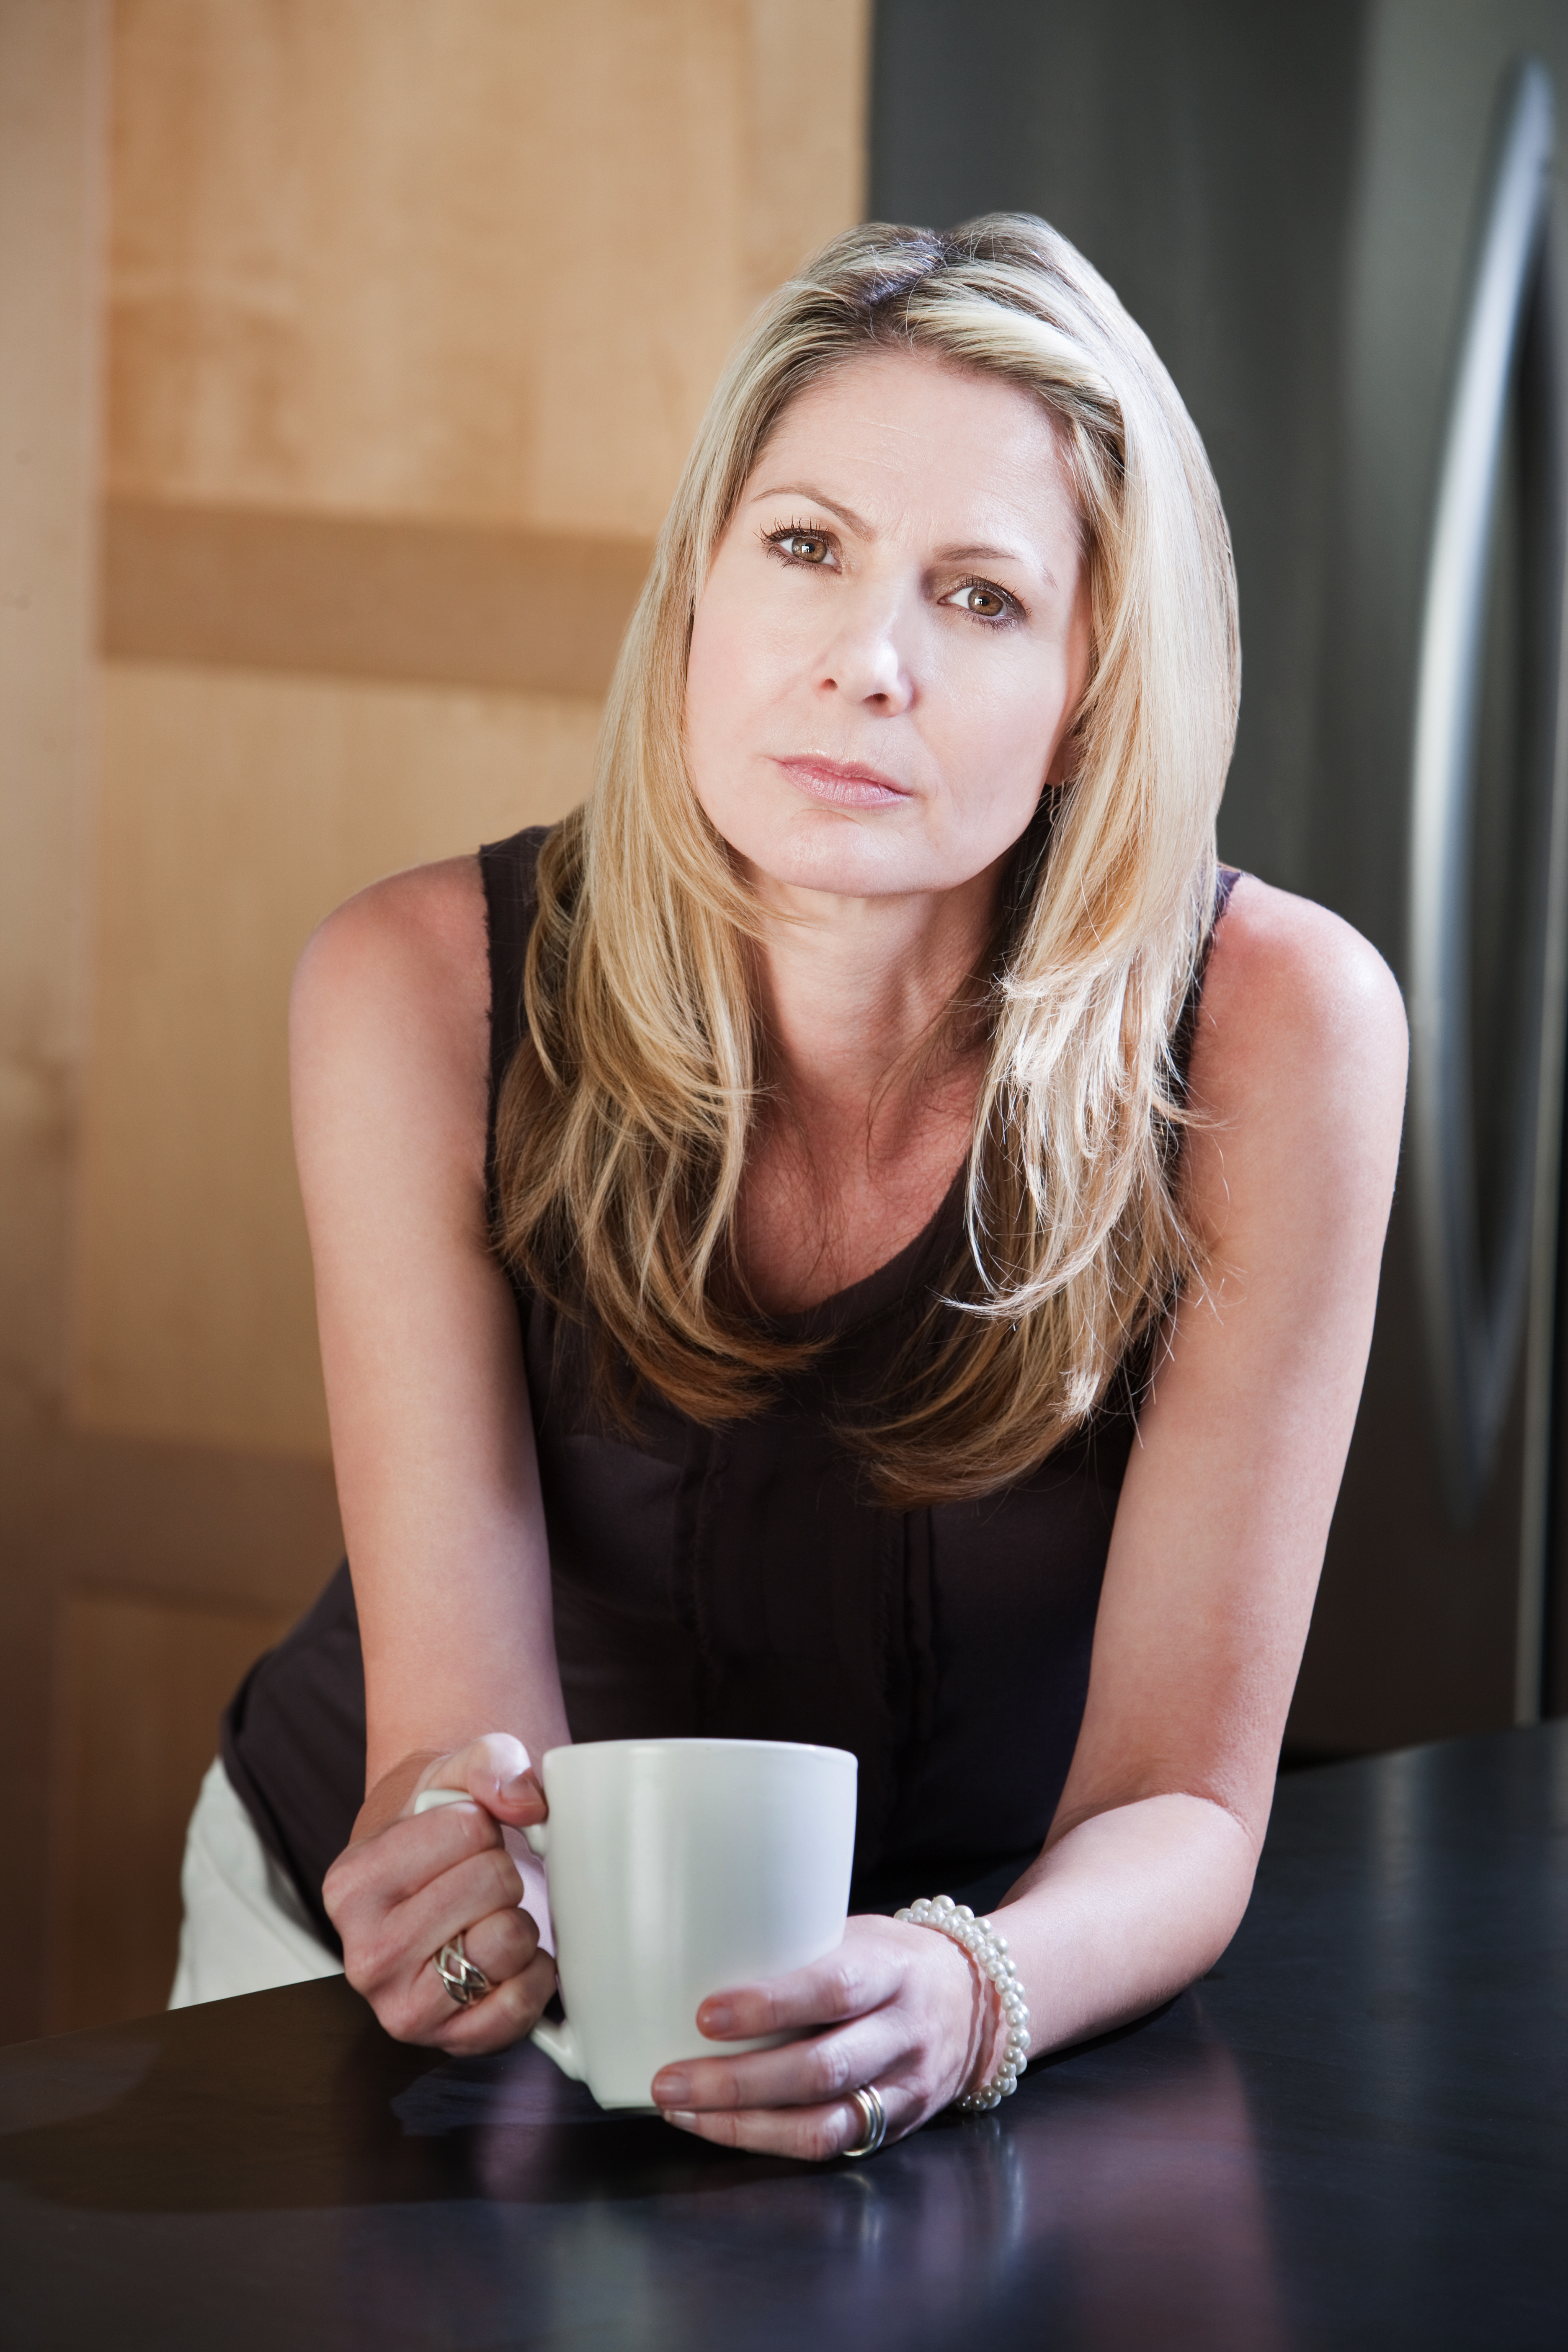 A middle-aged woman holding a coffee mug | Source: Shutterstock